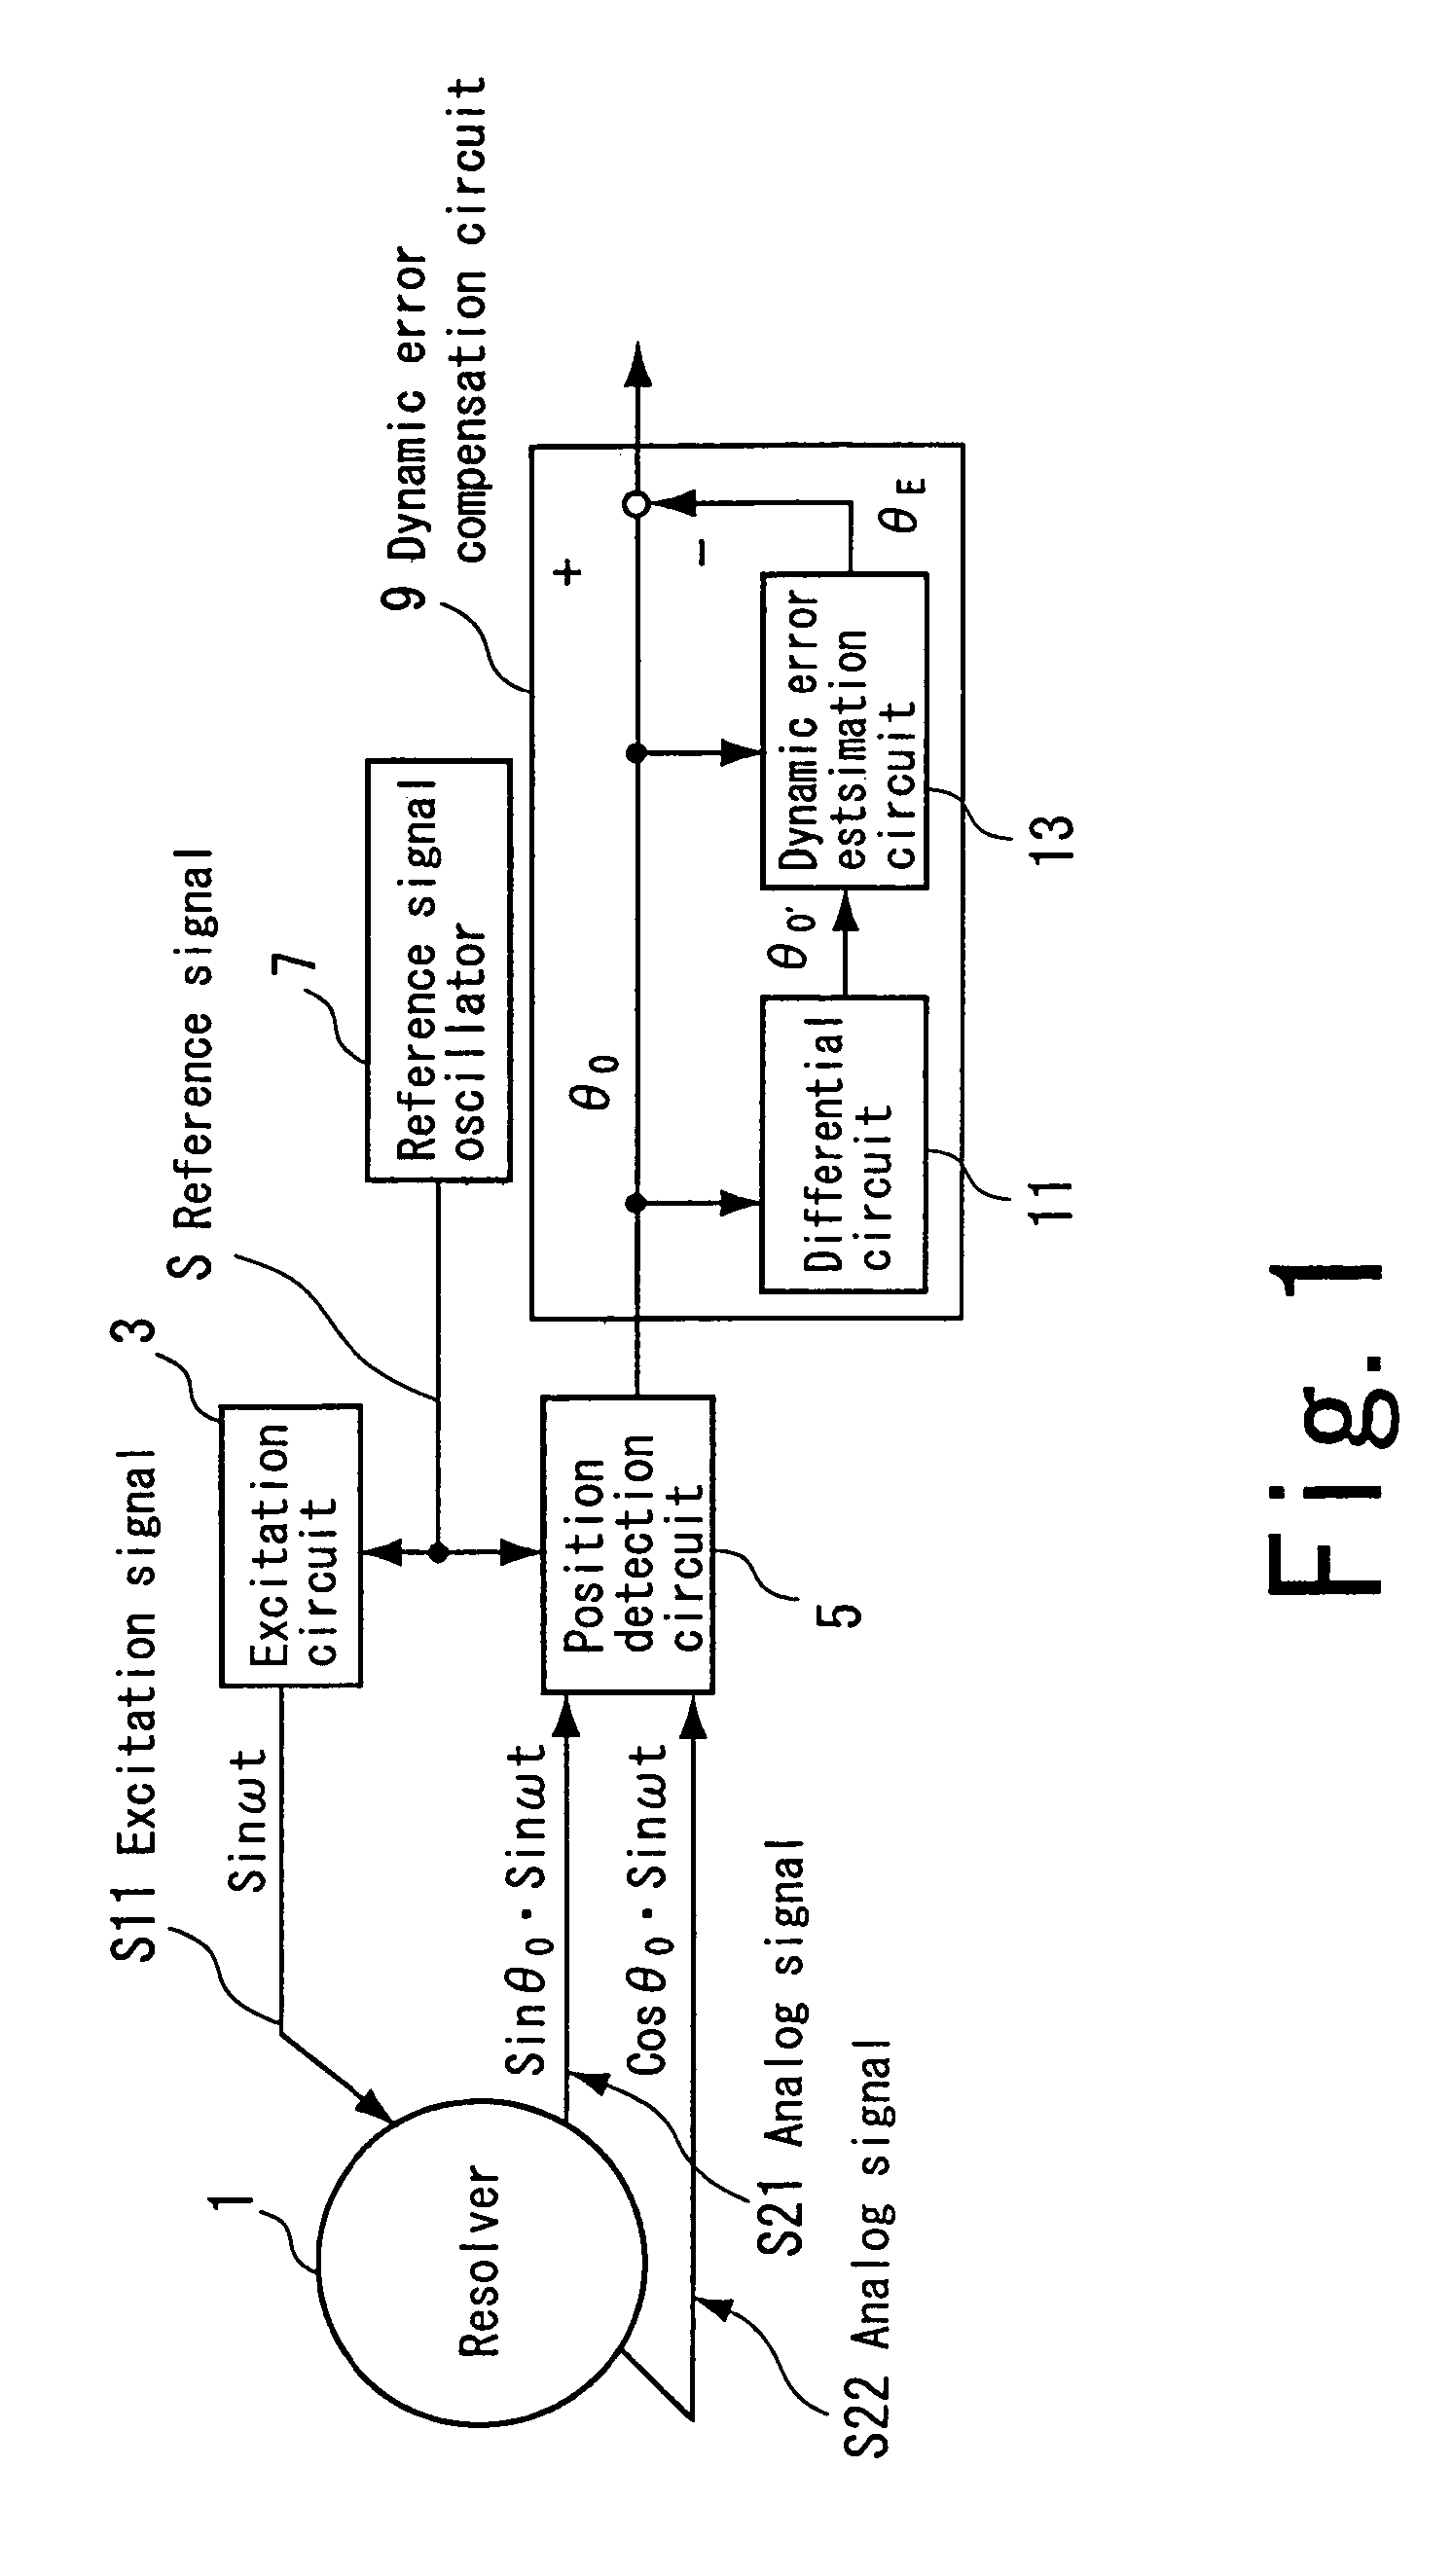 Compensation method of resolver detected position